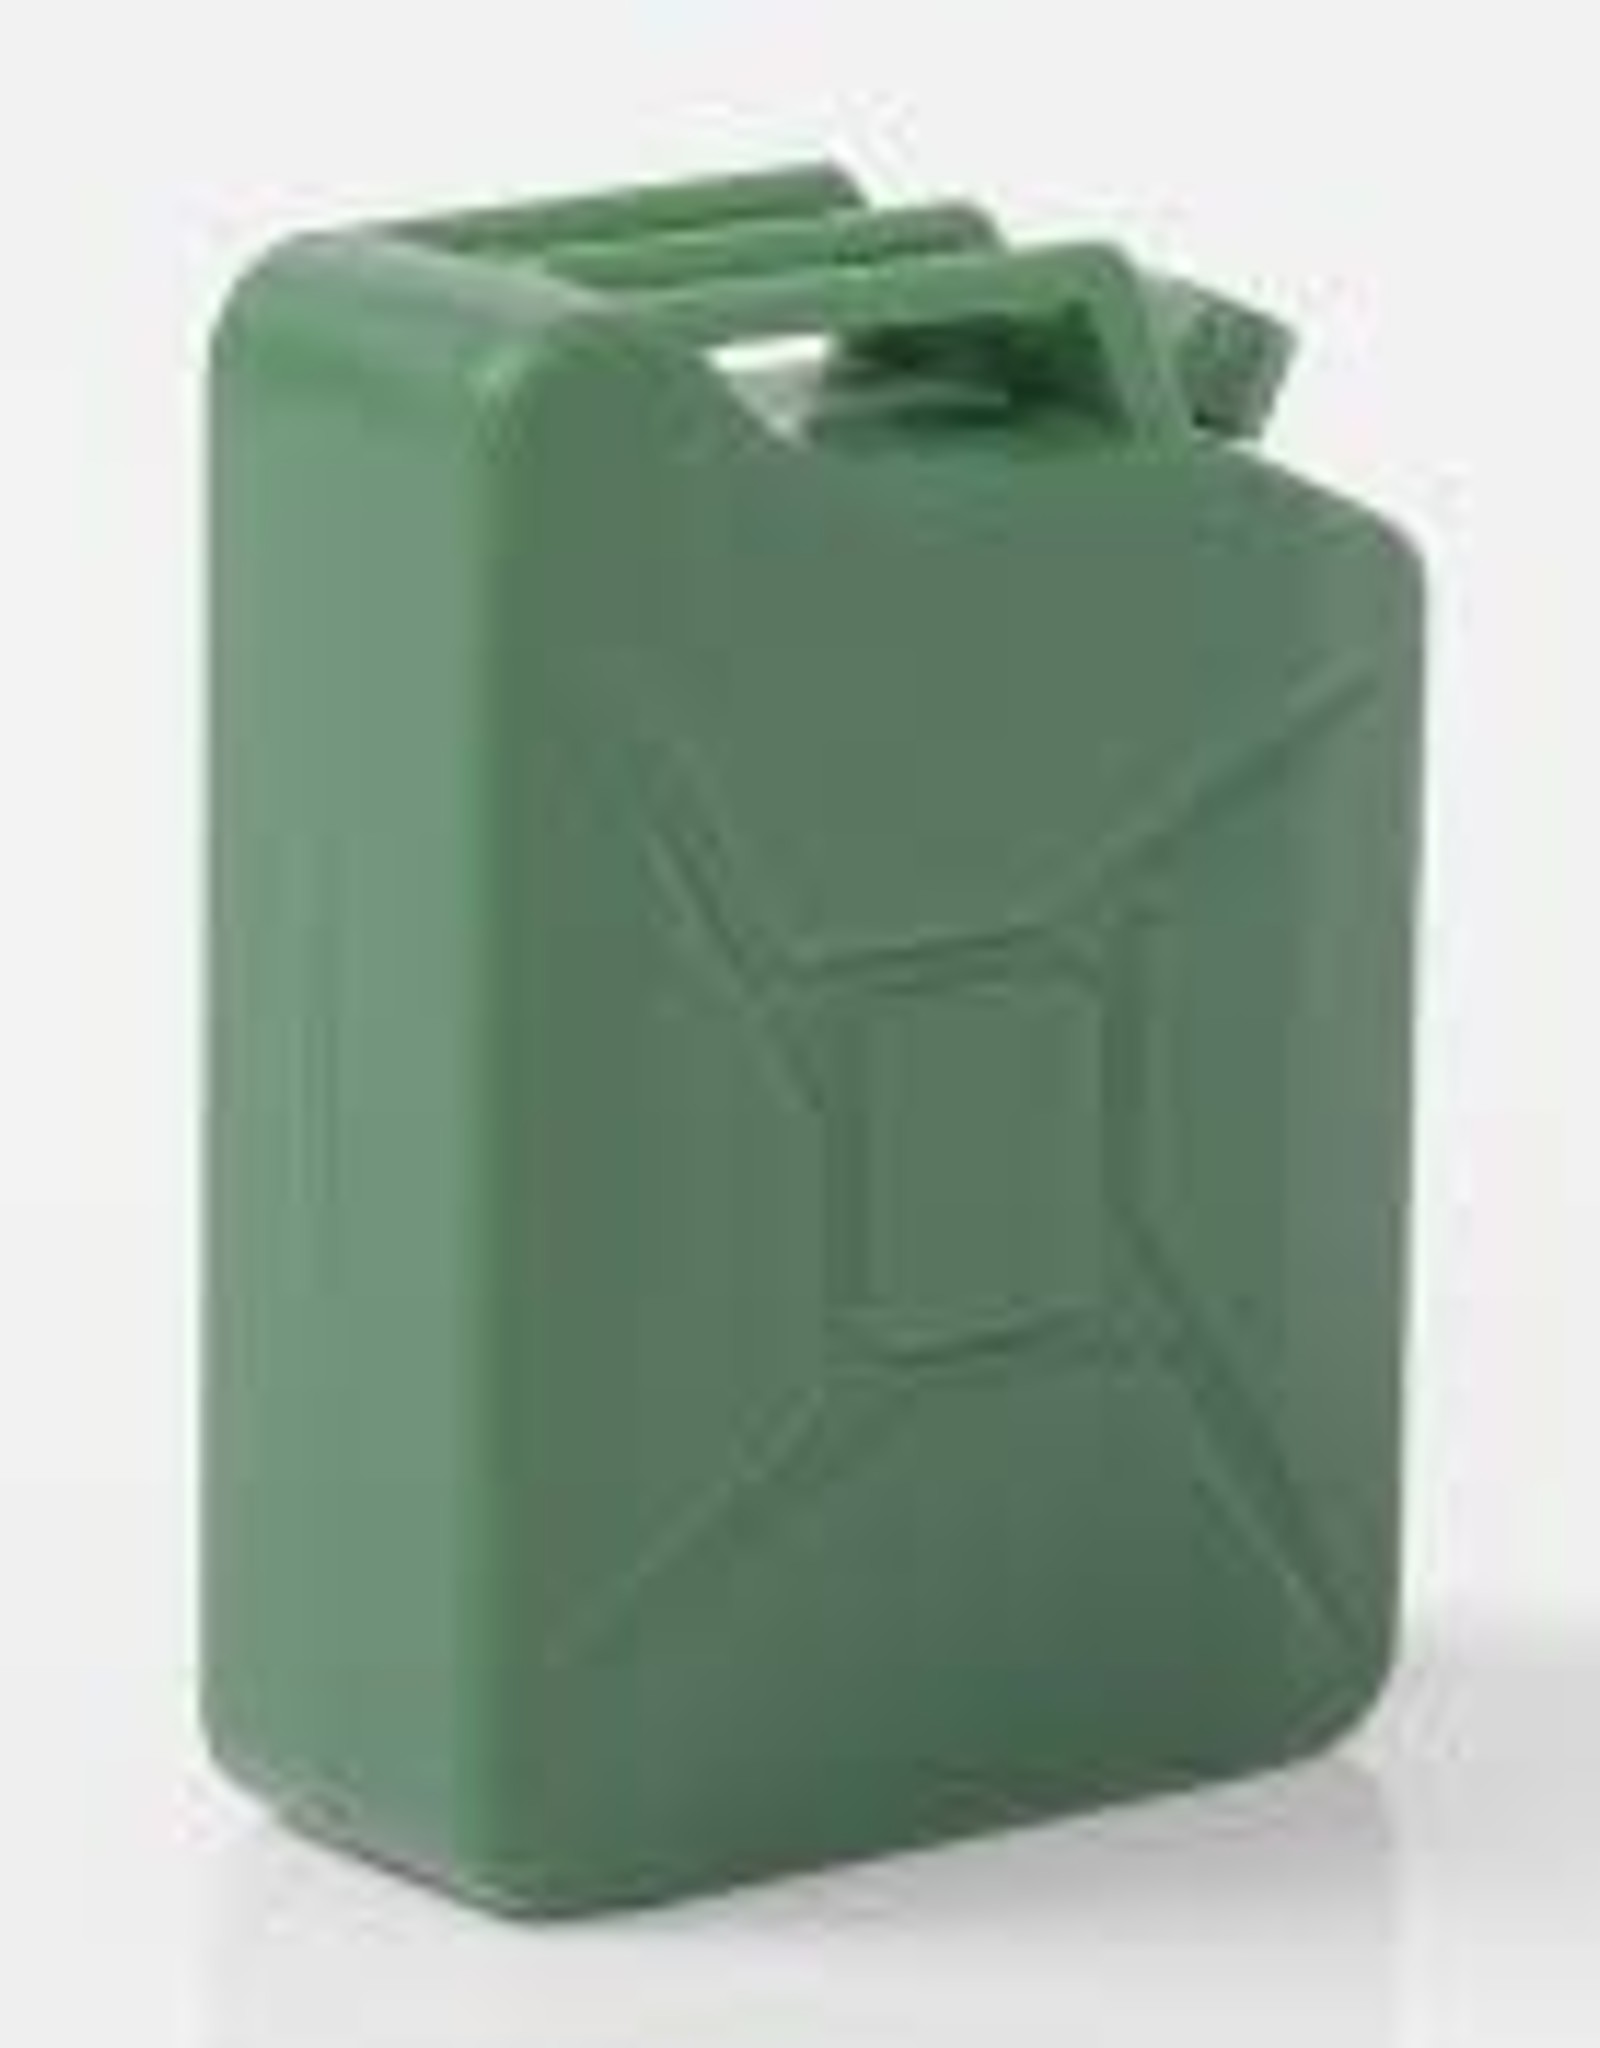 RC4WD SCALE GARAGE SERIES 1/10 MILITARY JERRY CAN